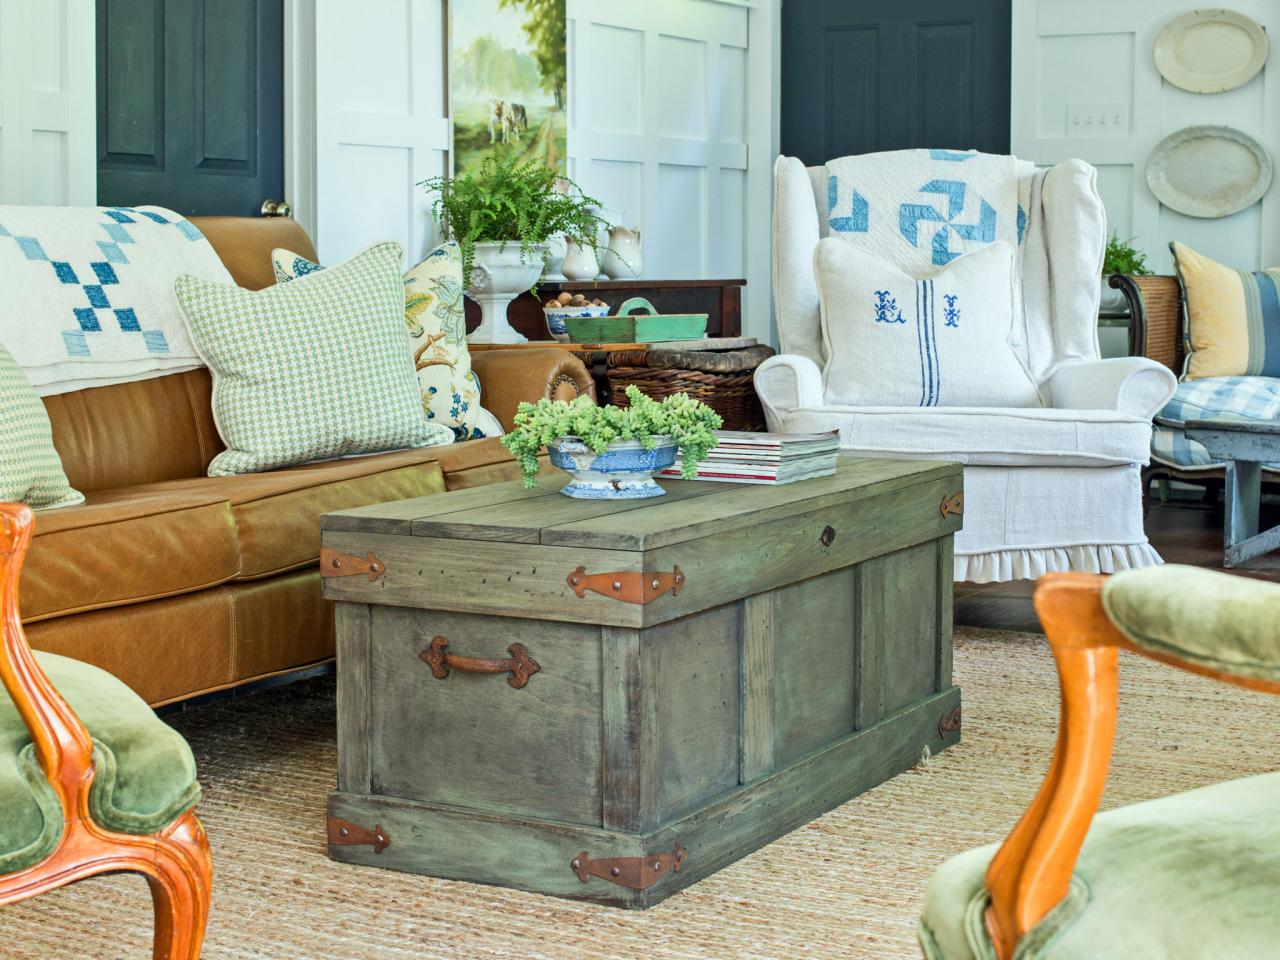 Rustic Trunk Style Coffee Table, How To Turn An Old Trunk Into A Coffee Table